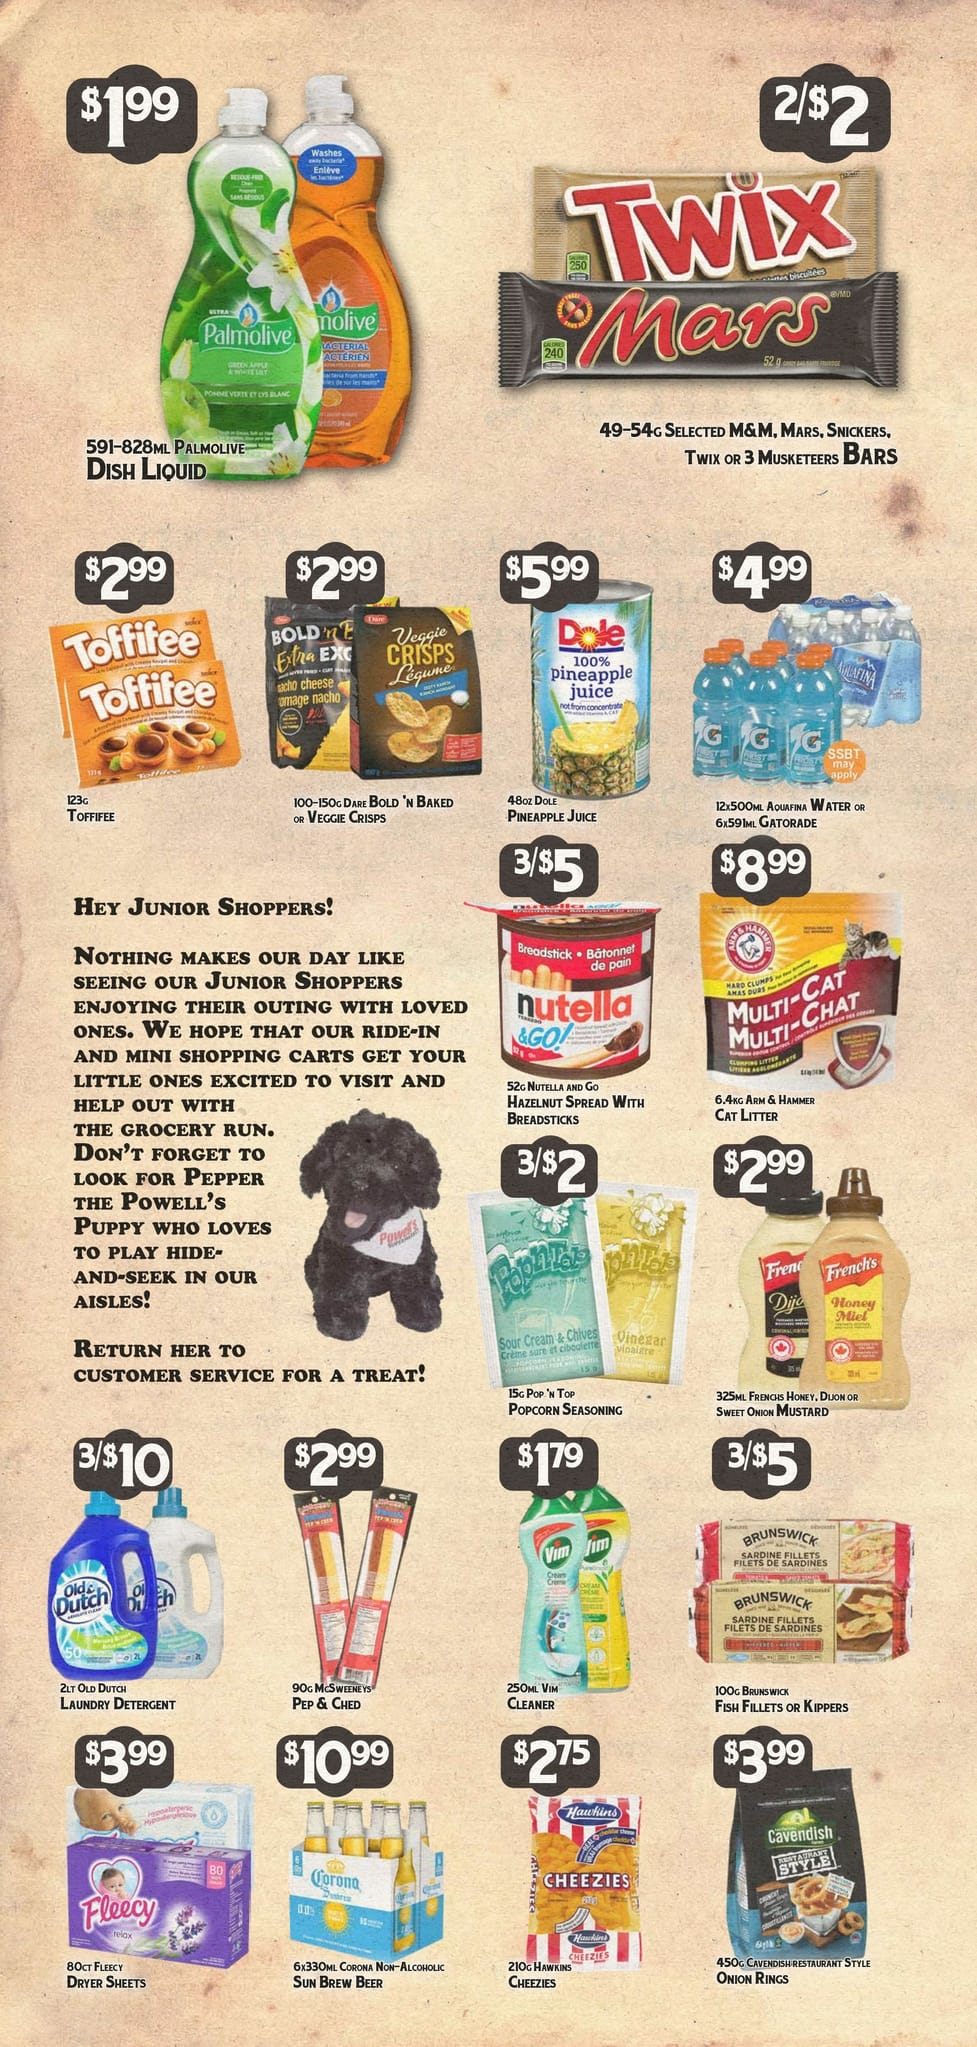 Powell's Supermarket - Weekly Flyer Specials - Page 12